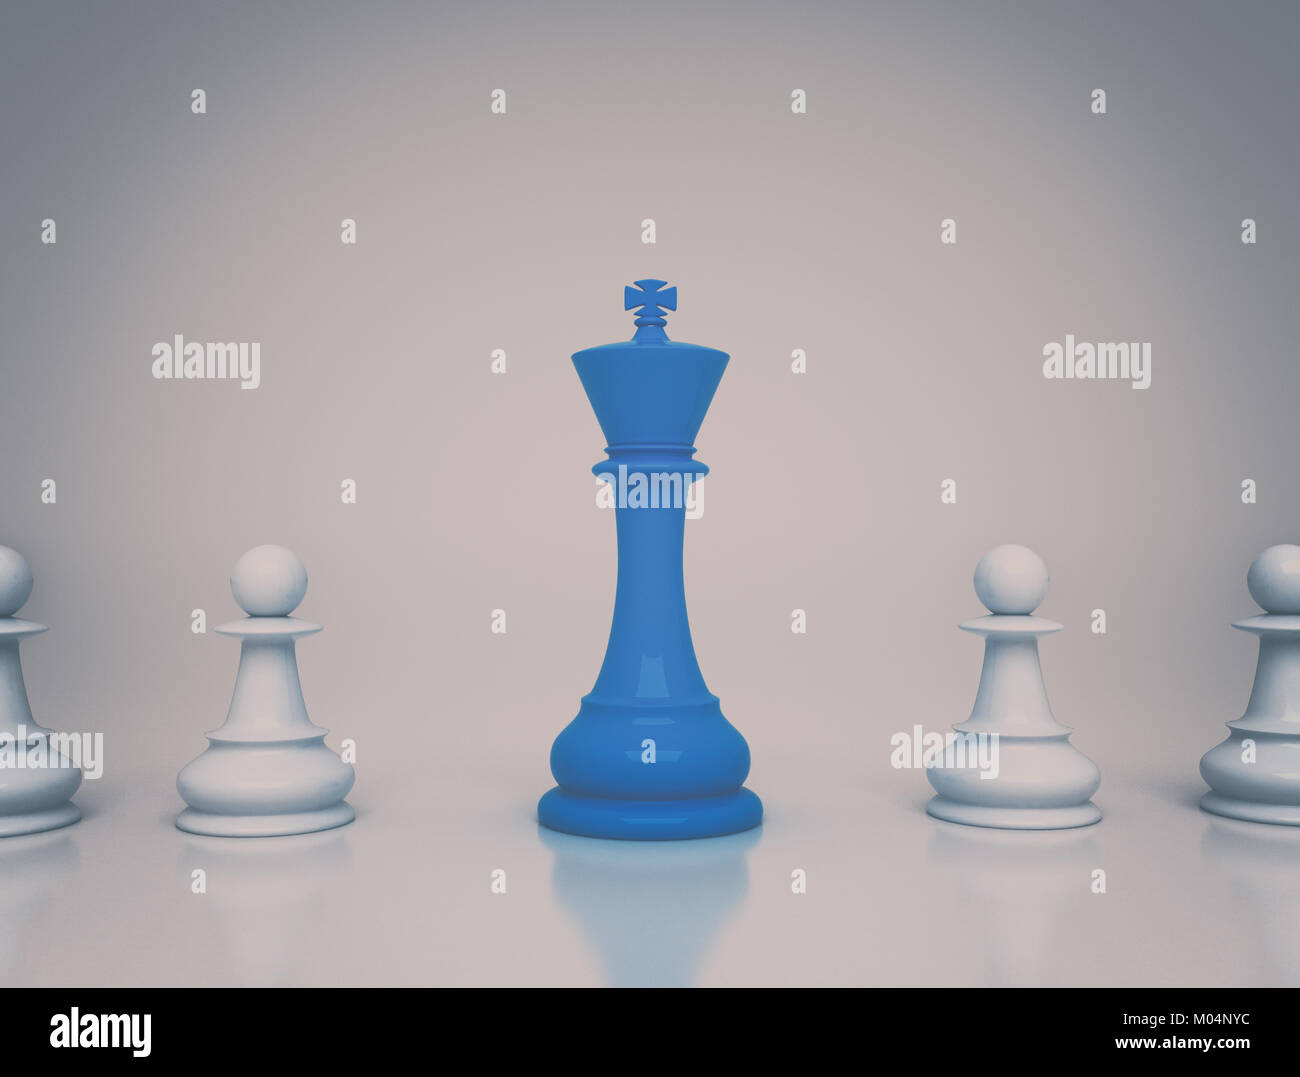 Blue Chess King standing out. Leadership background Stock Photo